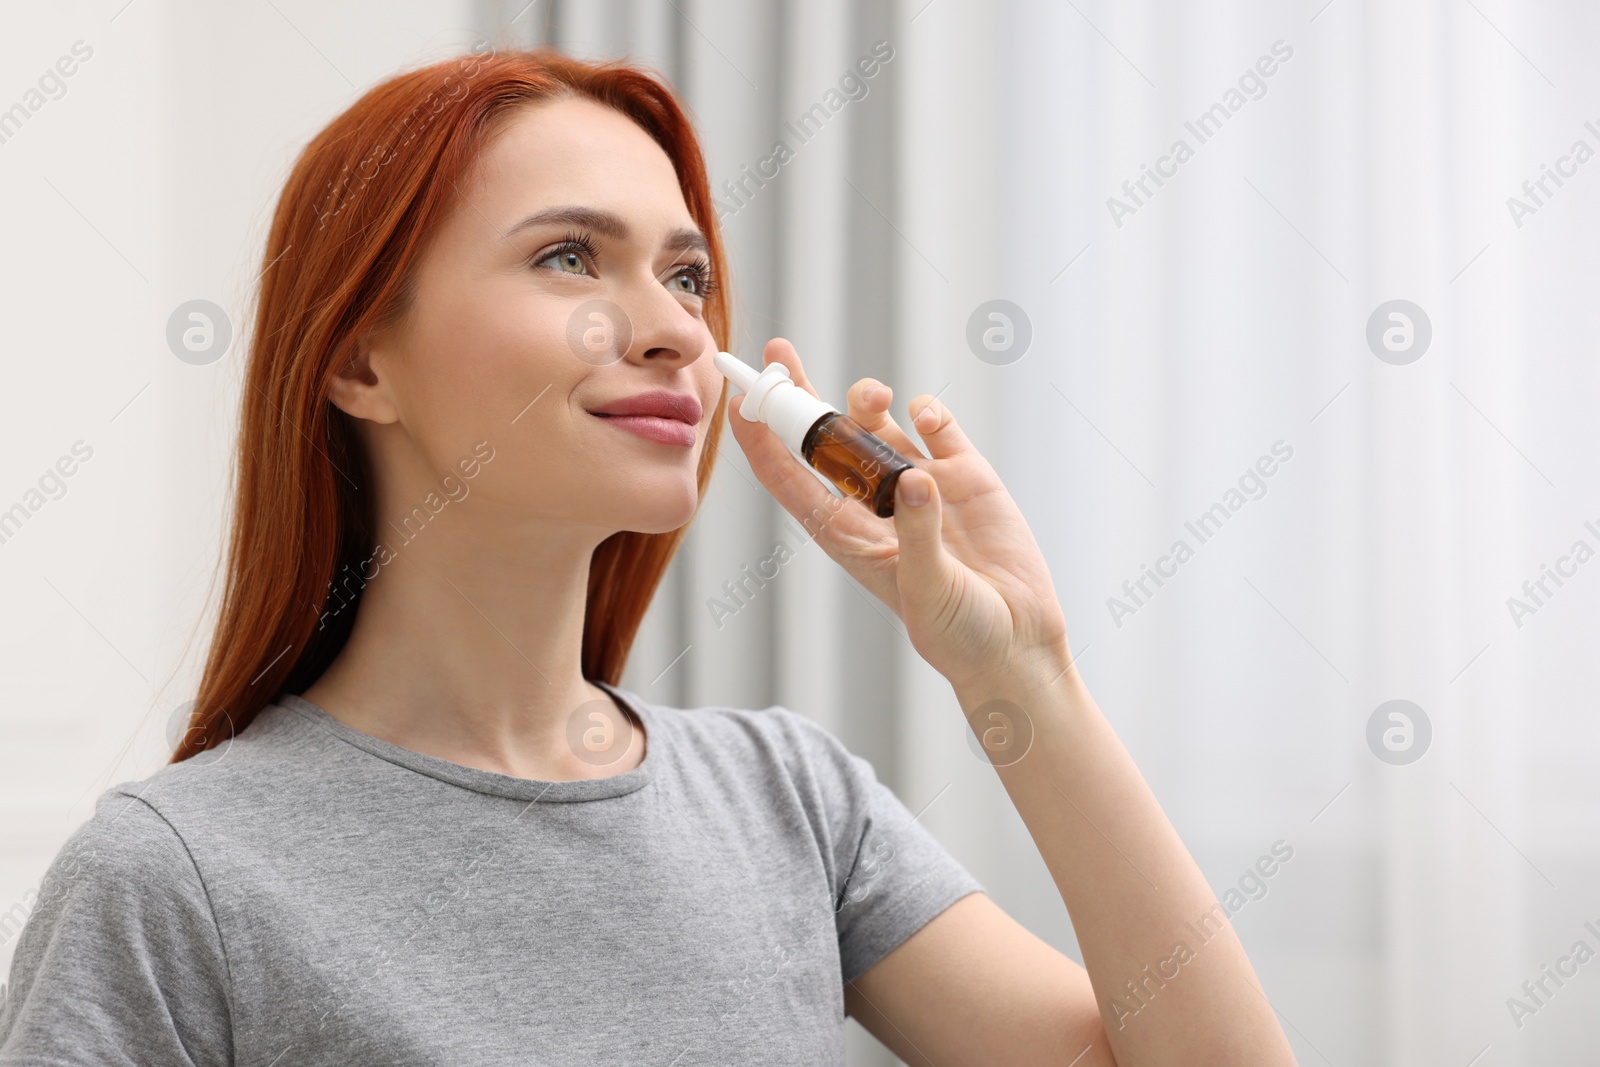 Photo of Medical drops. Woman using nasal spray at home, space for text